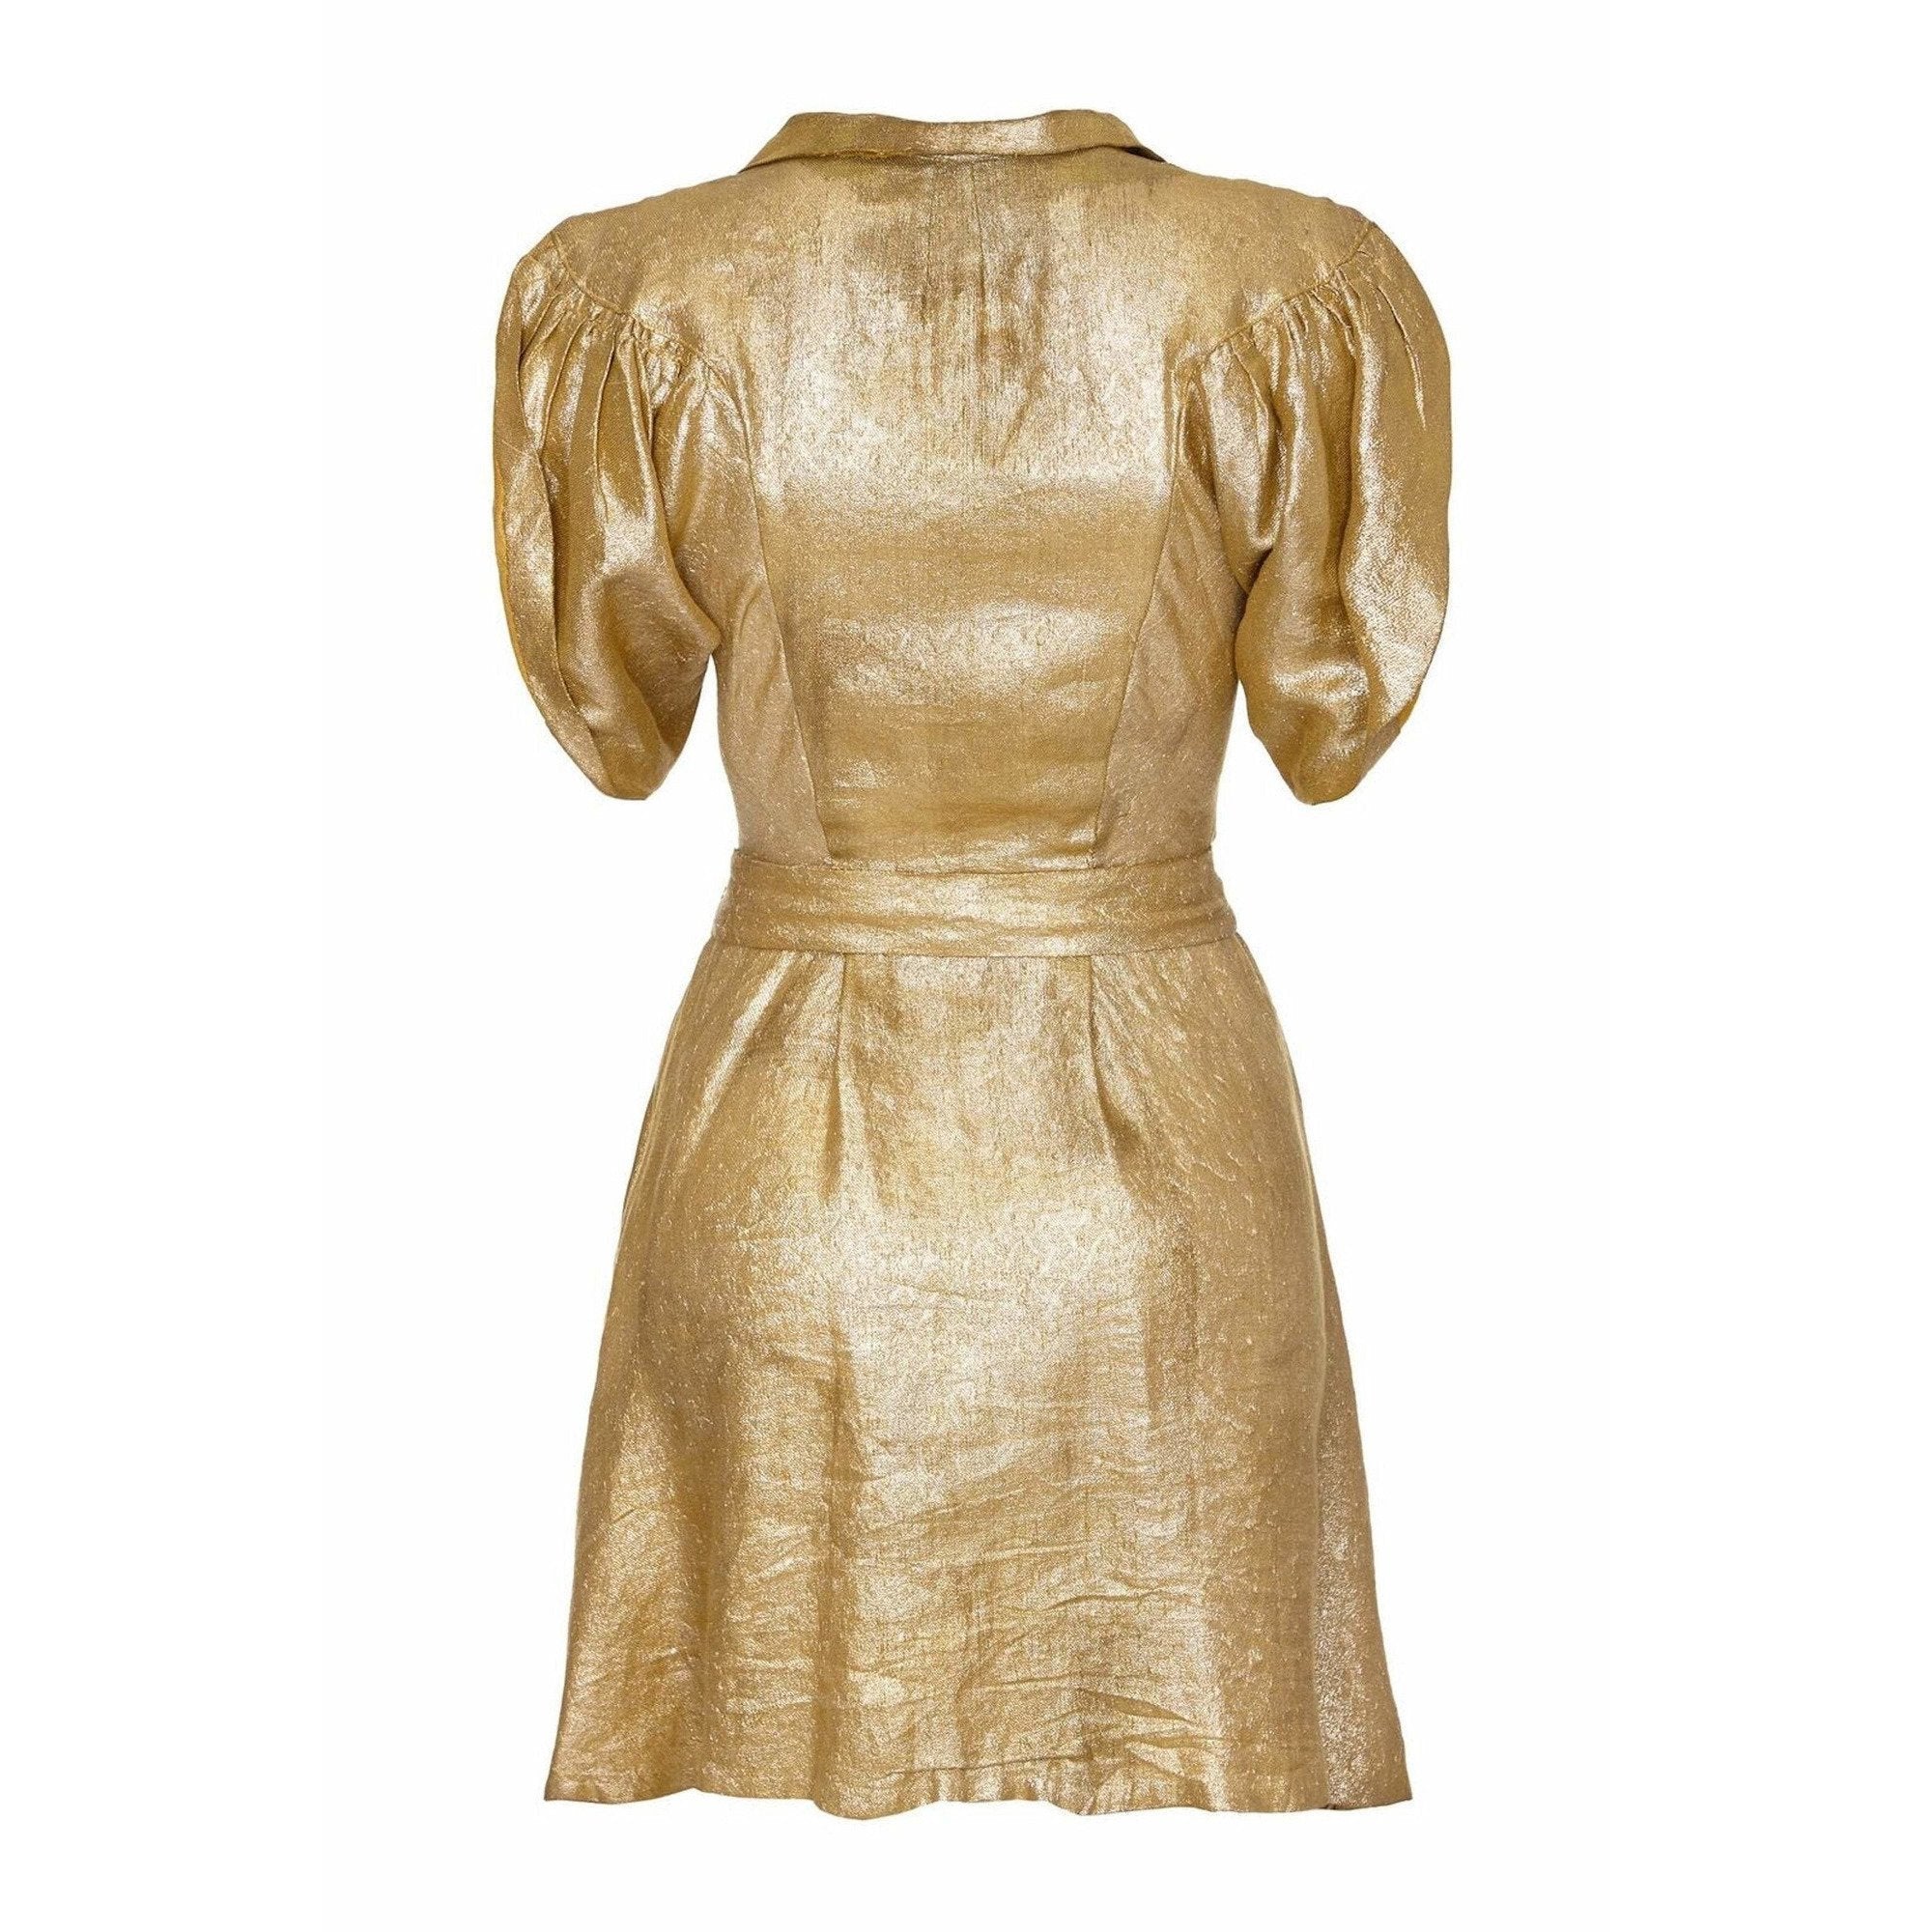 Late 1930s Gold Lame Party Dress with Cape Sleeves and Matching Belt